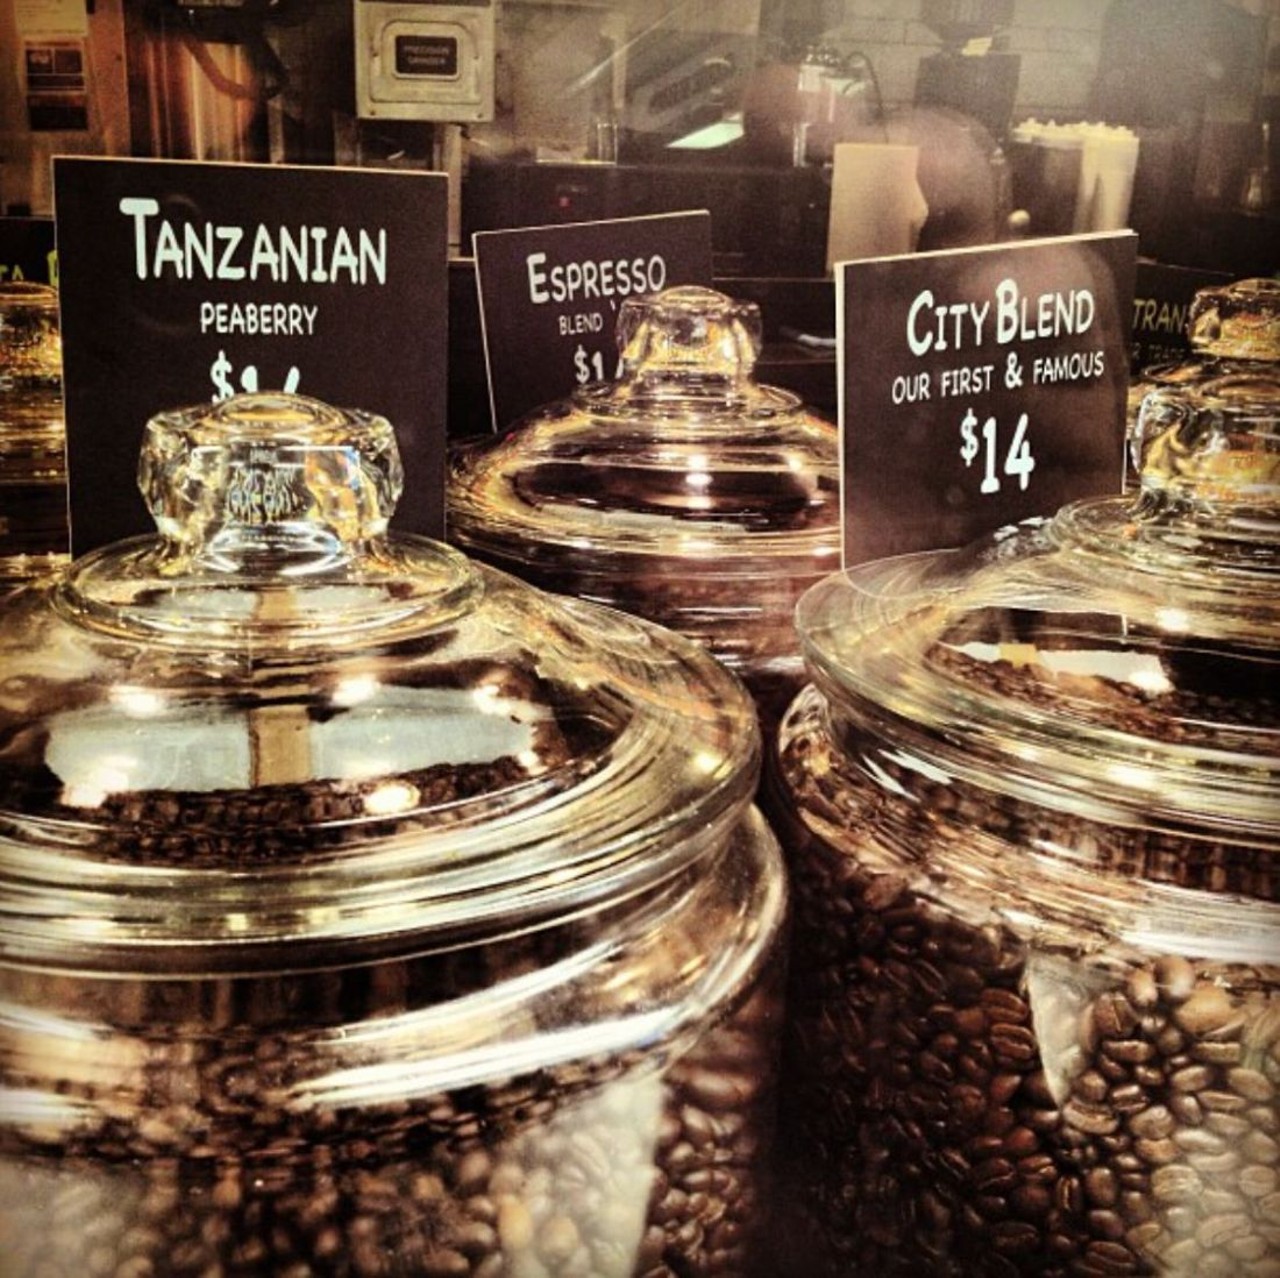  City Roast Coffee
1979 W. 25th St., 216-241-2479
For over 20 years, City Roast Coffee has satisfied Clevelanders' coffee cravings. Stop by and enjoy their local brews. 
Photo via jimmygianfagna/Instagram